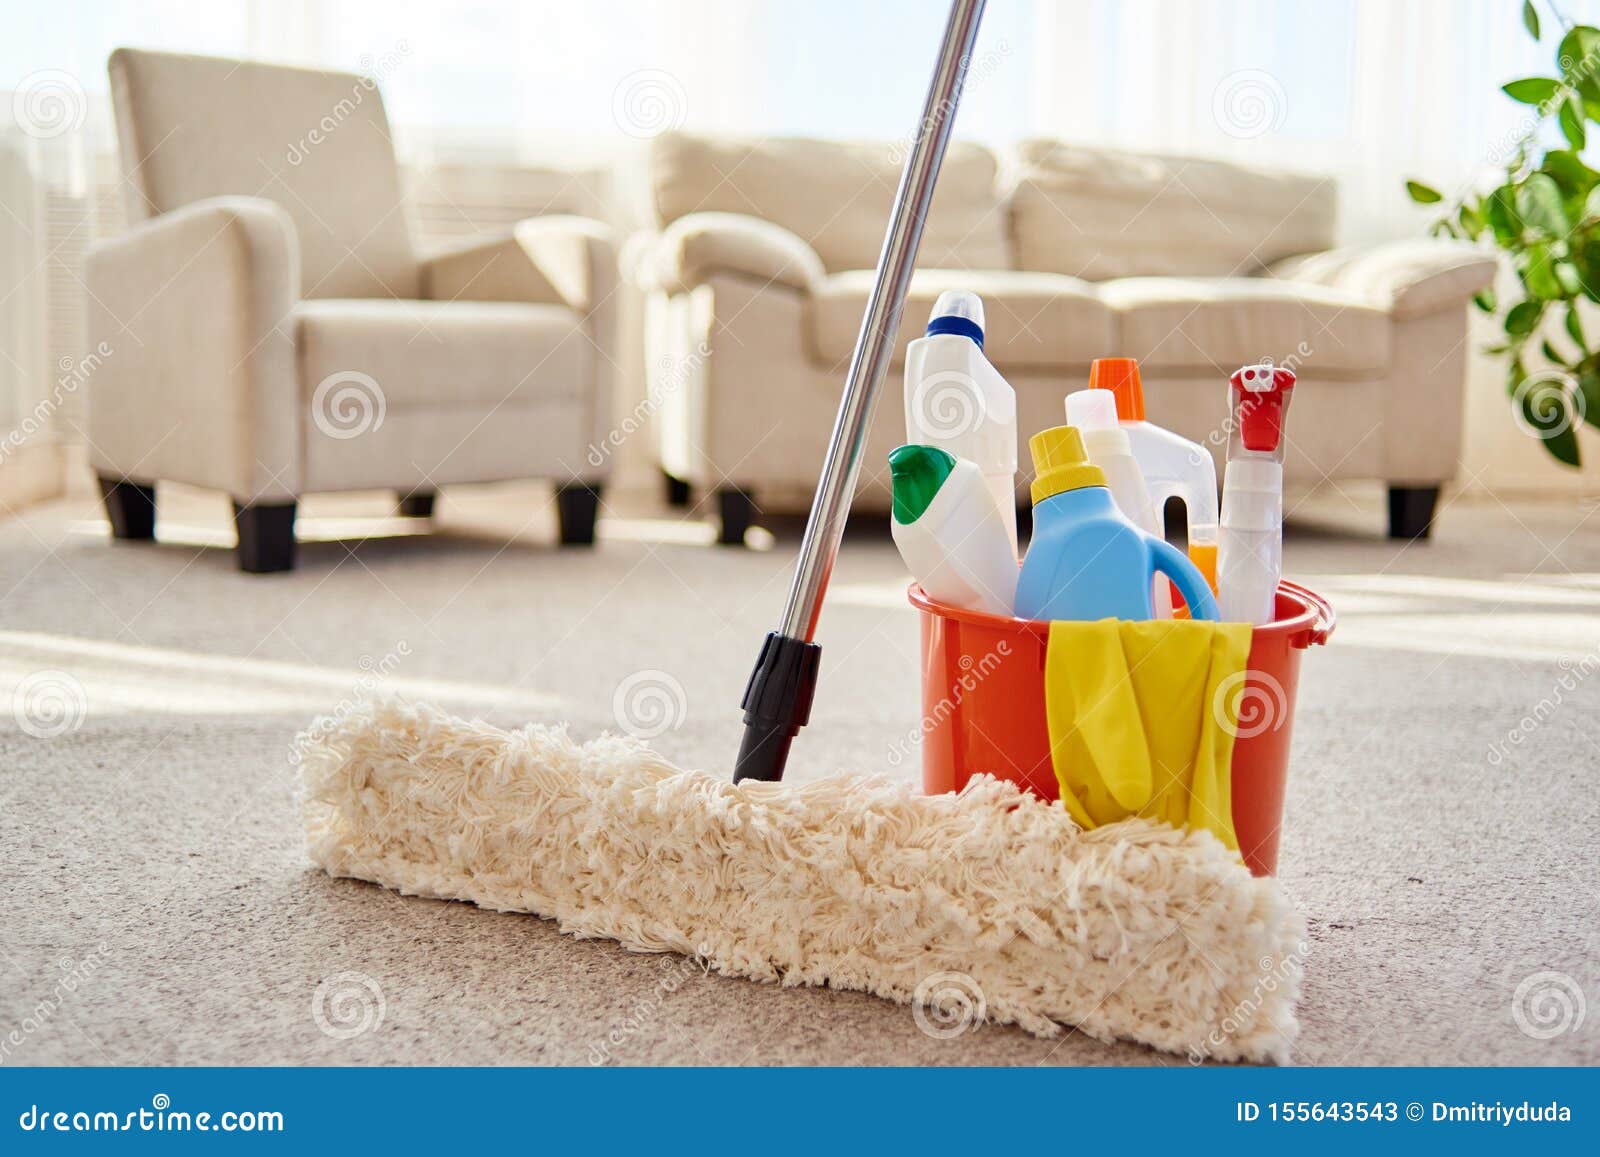 clean space home cleaning